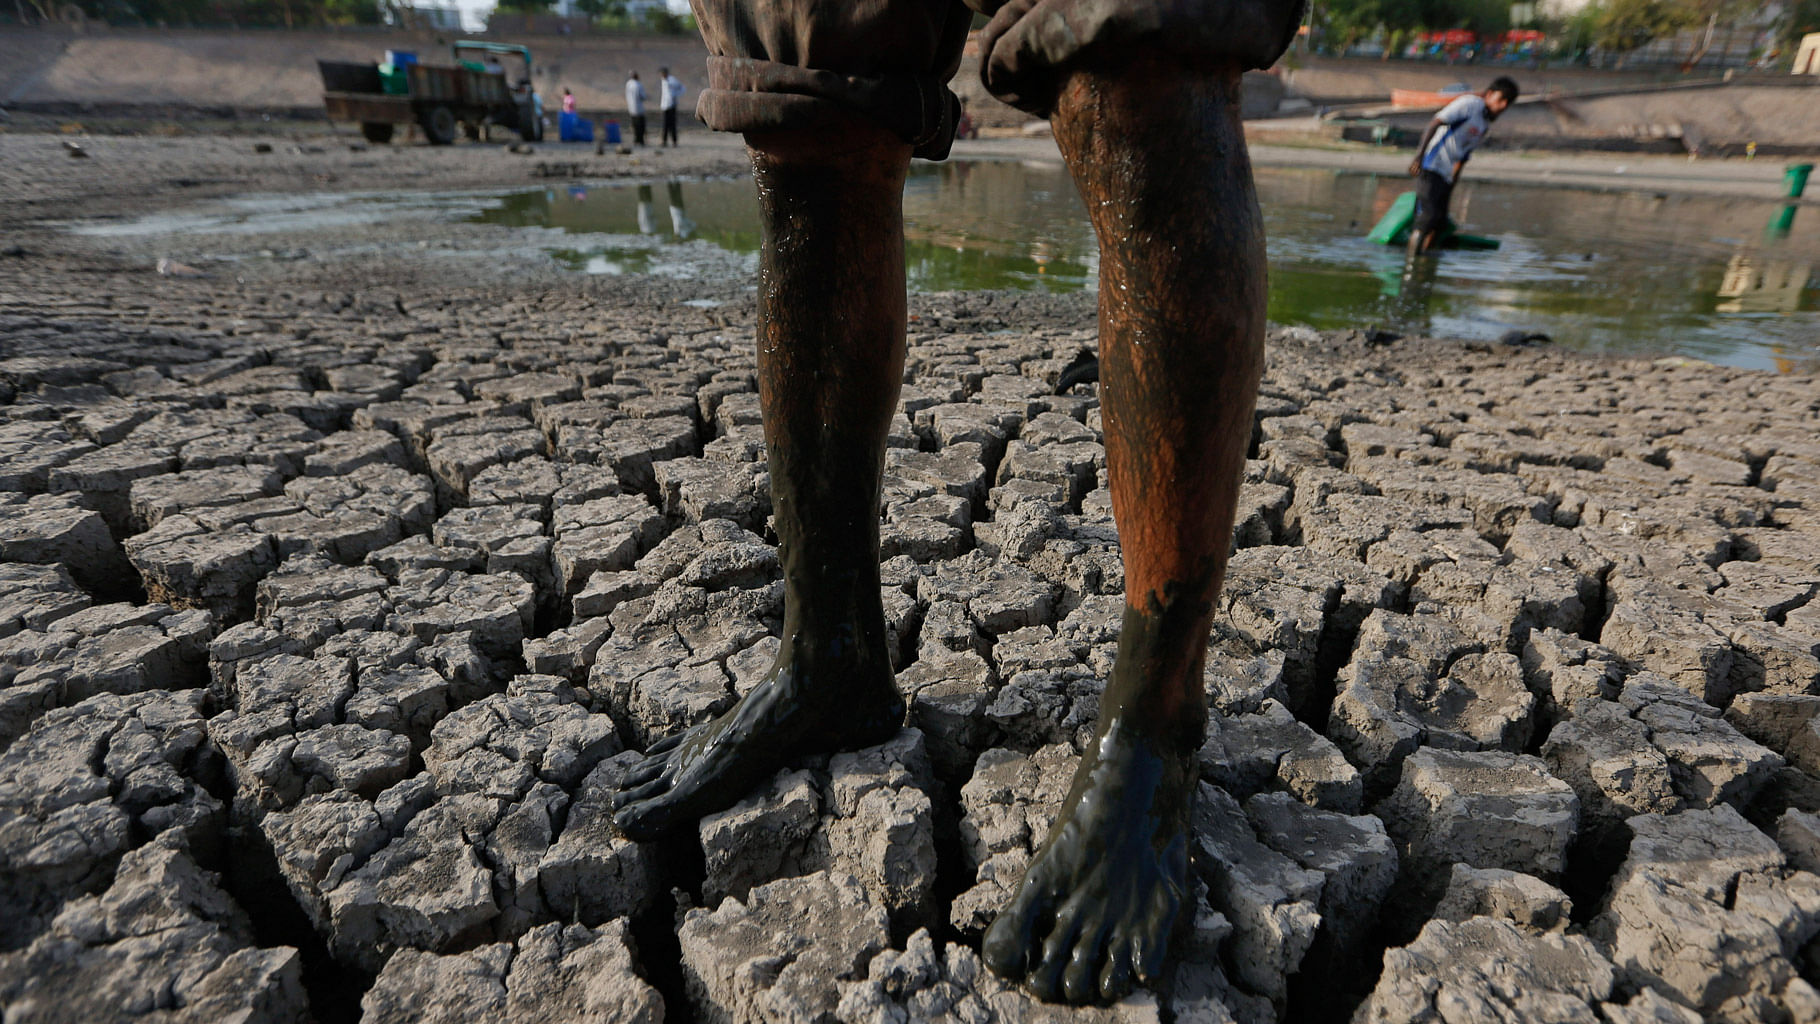  A man stands on the parched bed of the Vastrapur Lake in Ahmedabad, on Sunday, 24 April, 2016. (Photo: AP/Ajit Solanki)